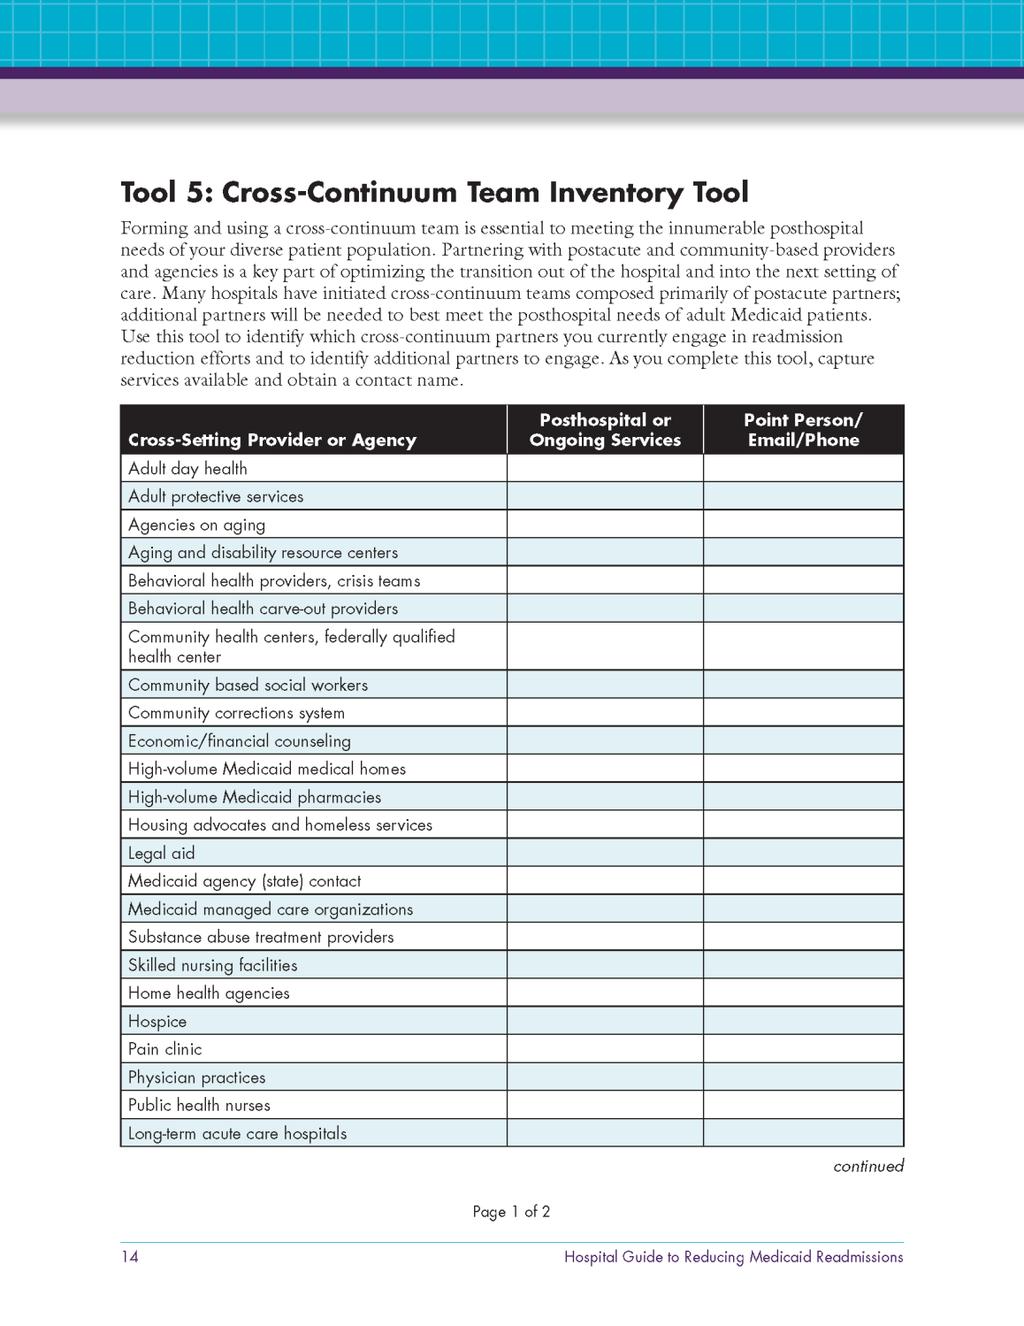 This tool prompts a comprehensive inventory of community-based providers and